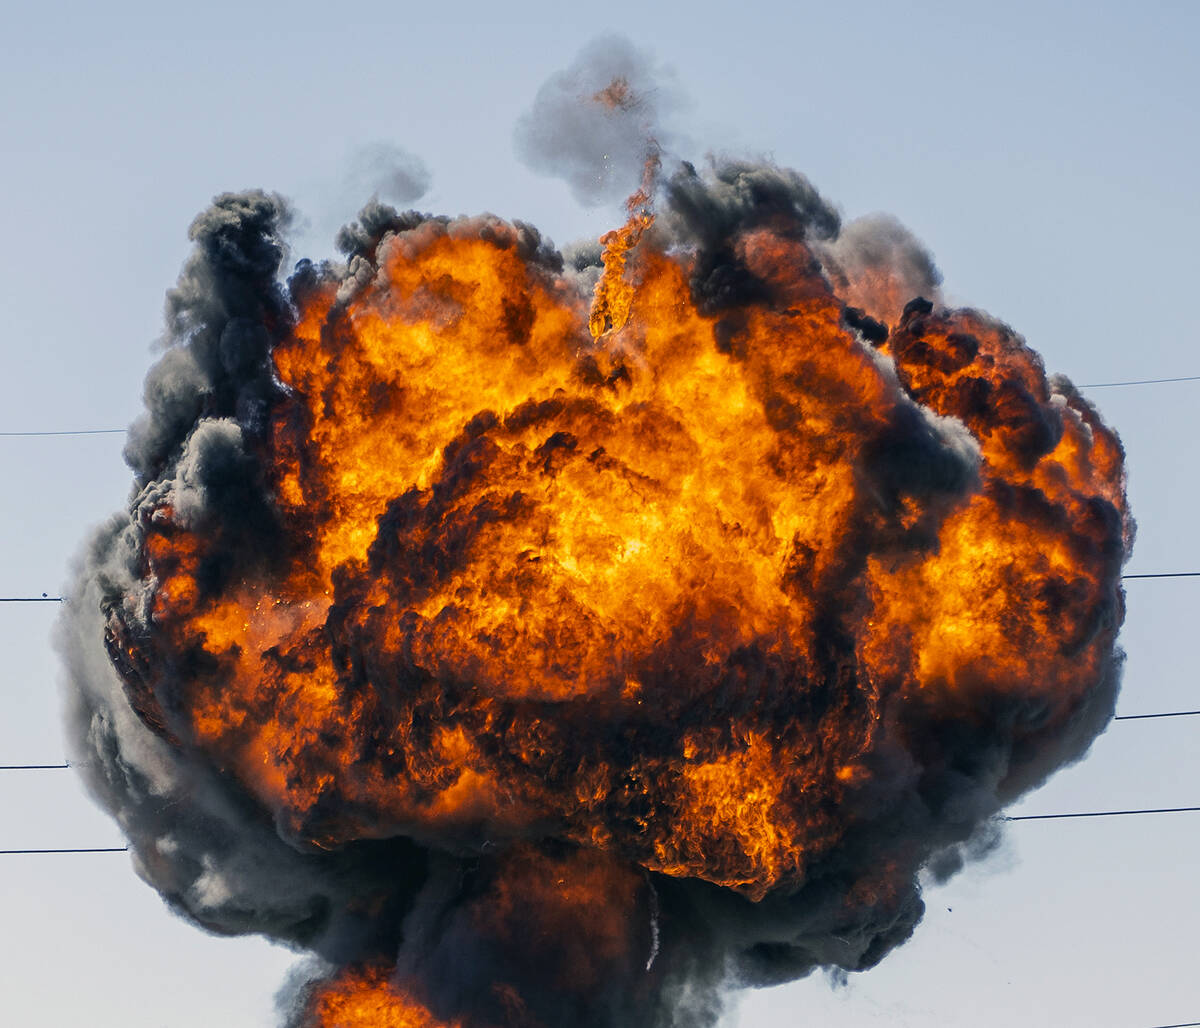 A fireball erupts during a controlled explosion on a media tour for the Las Vegas Fire & Rescue ...